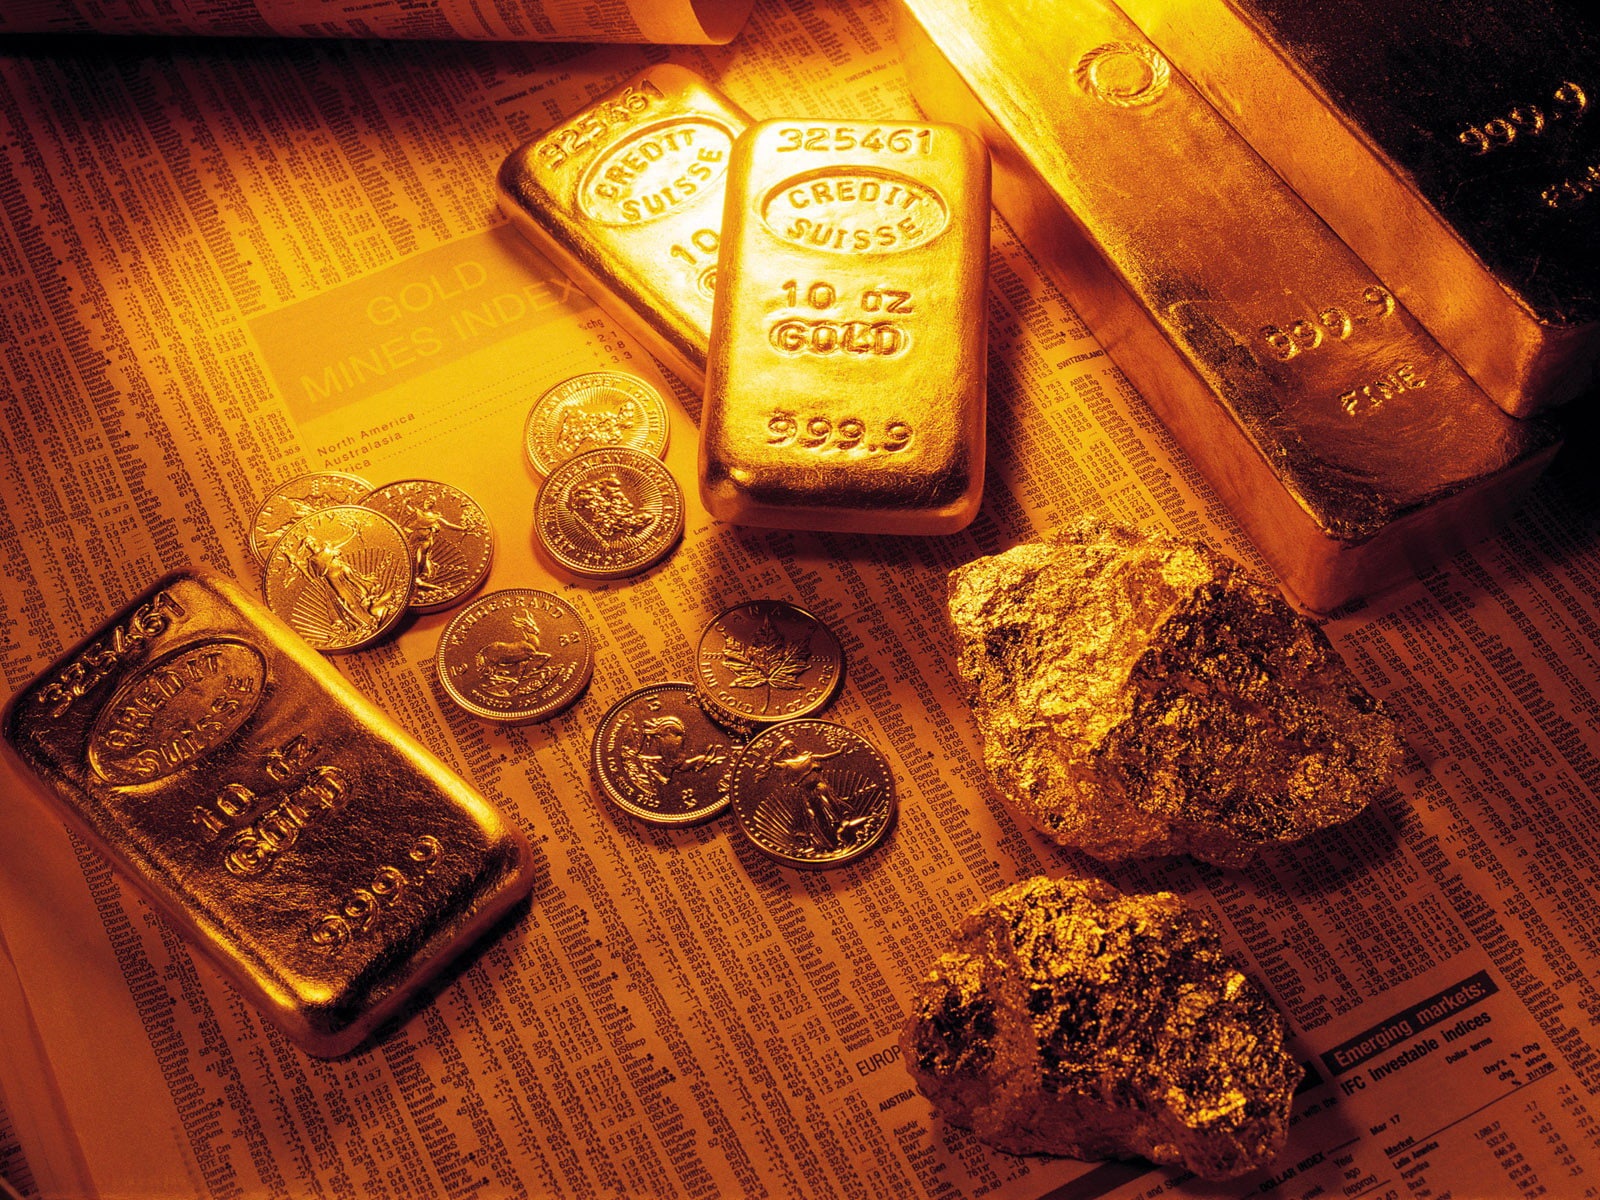 Bullion coin dealer near me | Buy, sell, and trade gold and other precious metals